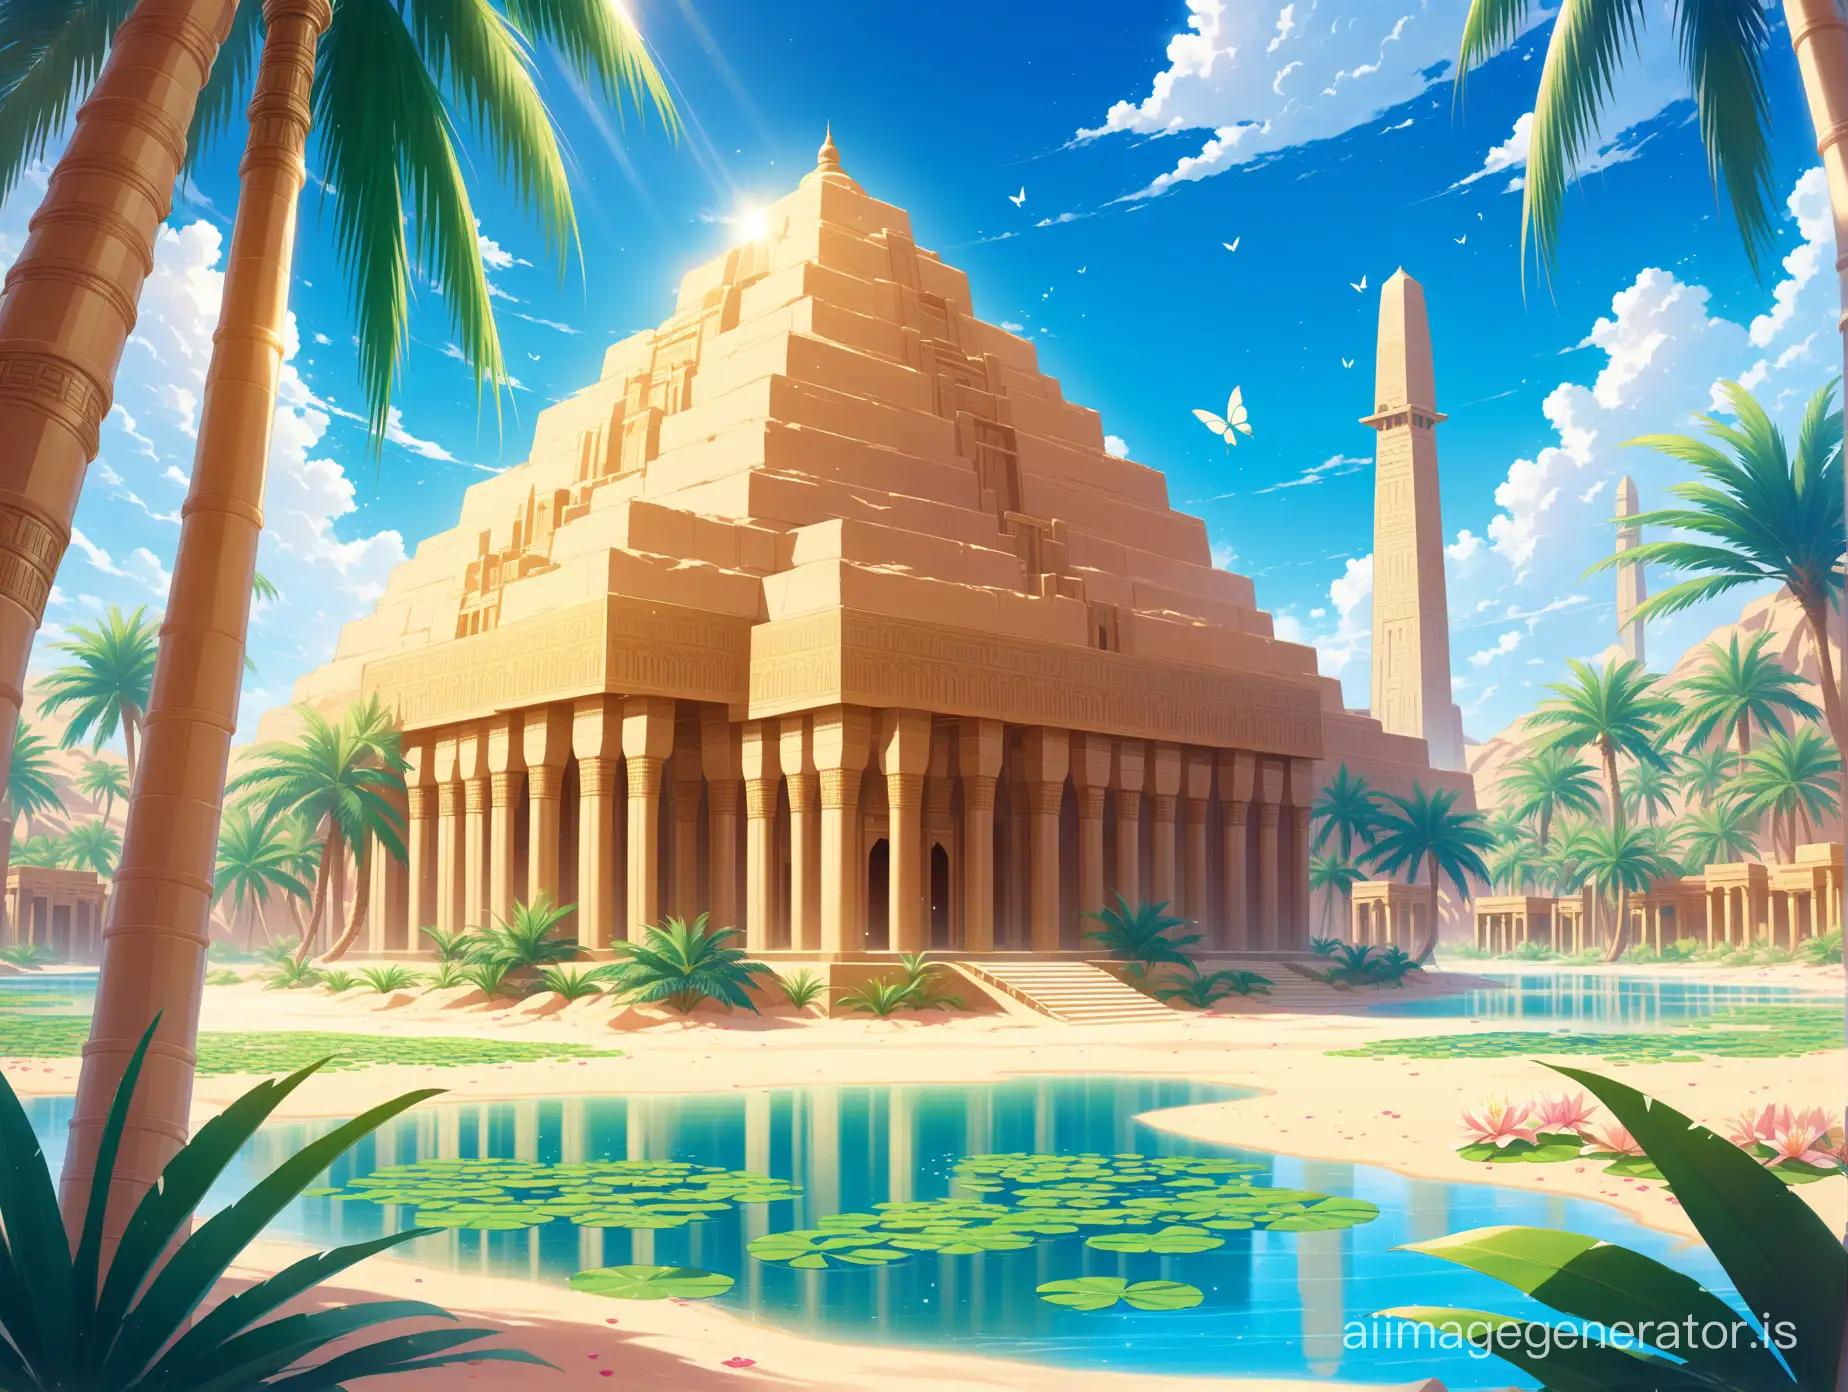 Mokoto shinkai style , oasis ,palm, sand, arbian style, colorful petals, lily pad, flower beside Oasis, glistening sunlight , Arabian tample, blue sky, clouds, beautiful fantasy Arabian oasis , Egyptian tample,  butterfly, ultra hd, High quality, anime style